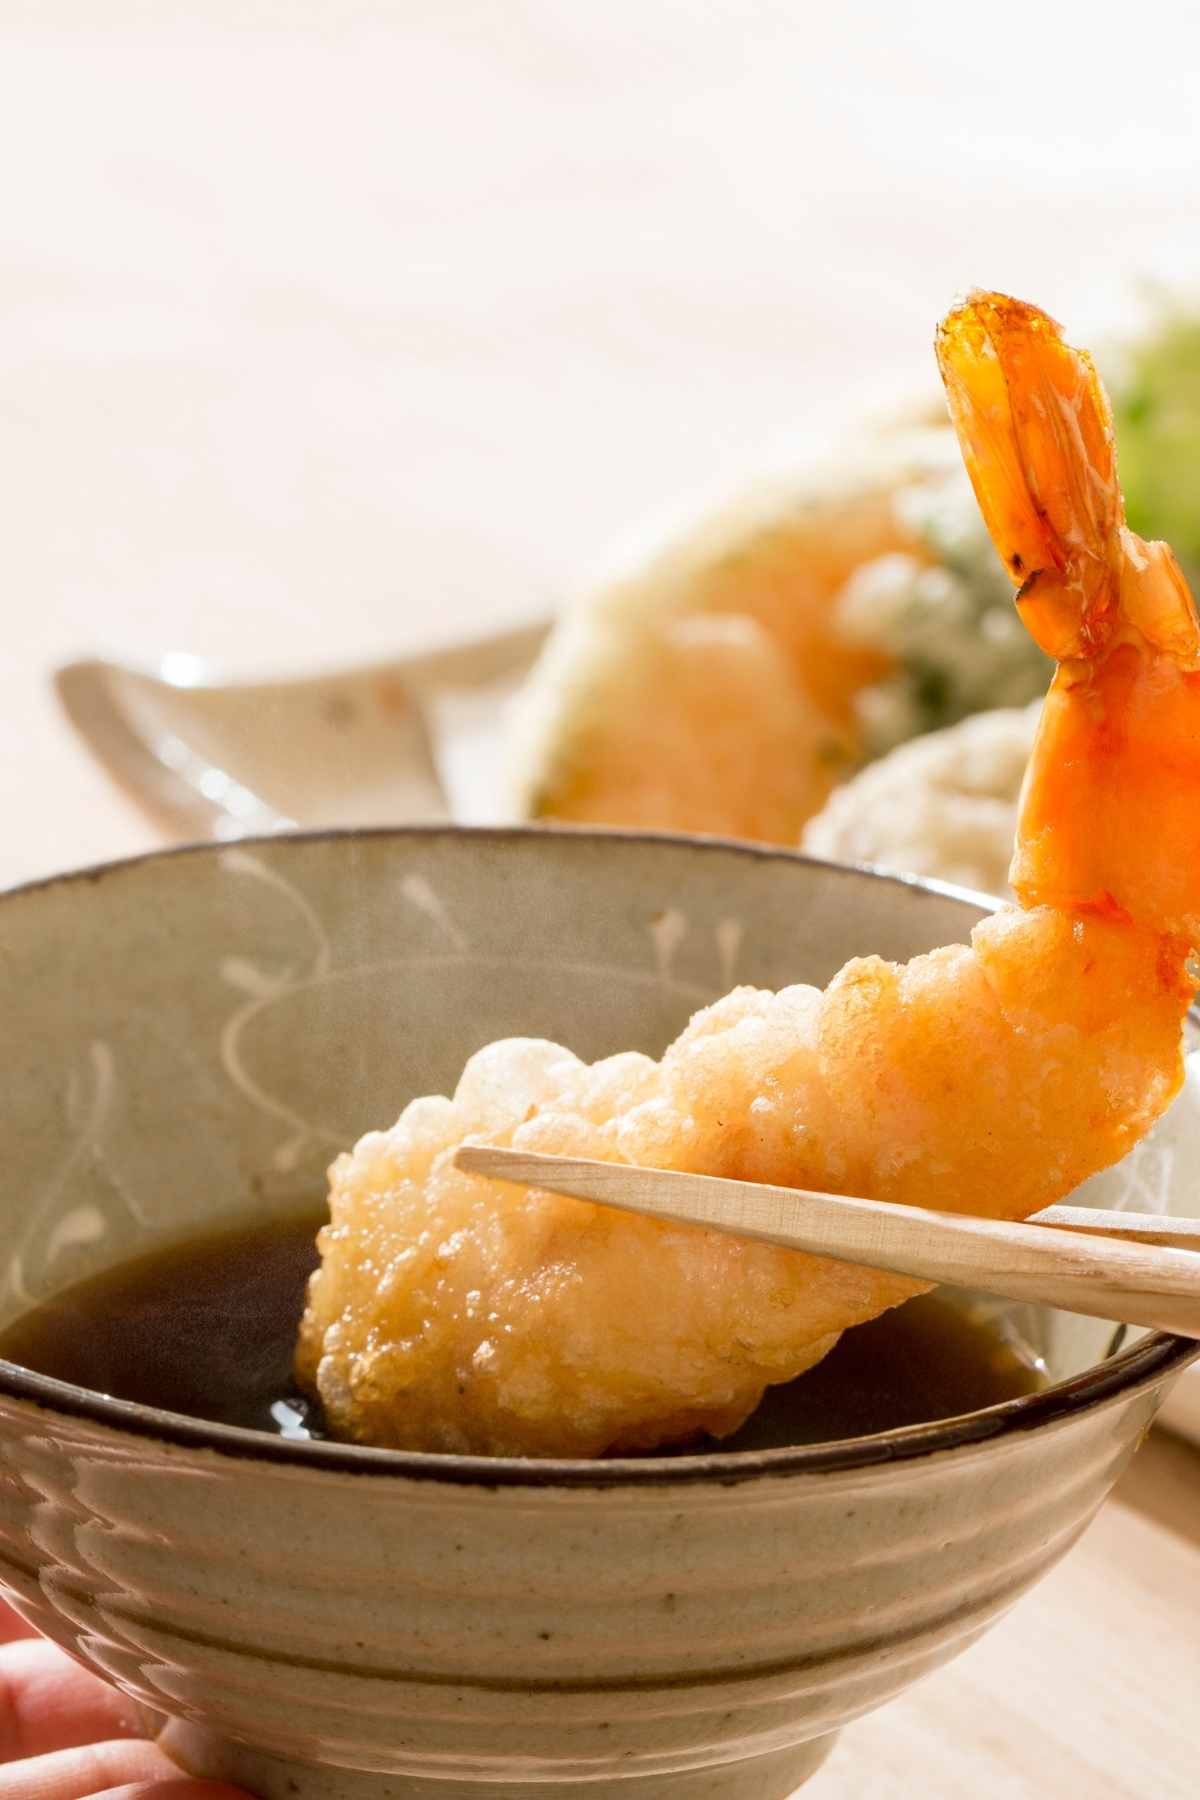 Tempura is a popular Japanese restaurant dish that is frequently served. There are many varieties of tempura such as shrimp, fish or different kinds of vegetables. Crispy tempura is best enjoyed with a dipping sauce for battered food called Tetsuyu. It’s a savory sauce that complements and brings out the flavor of tempura.